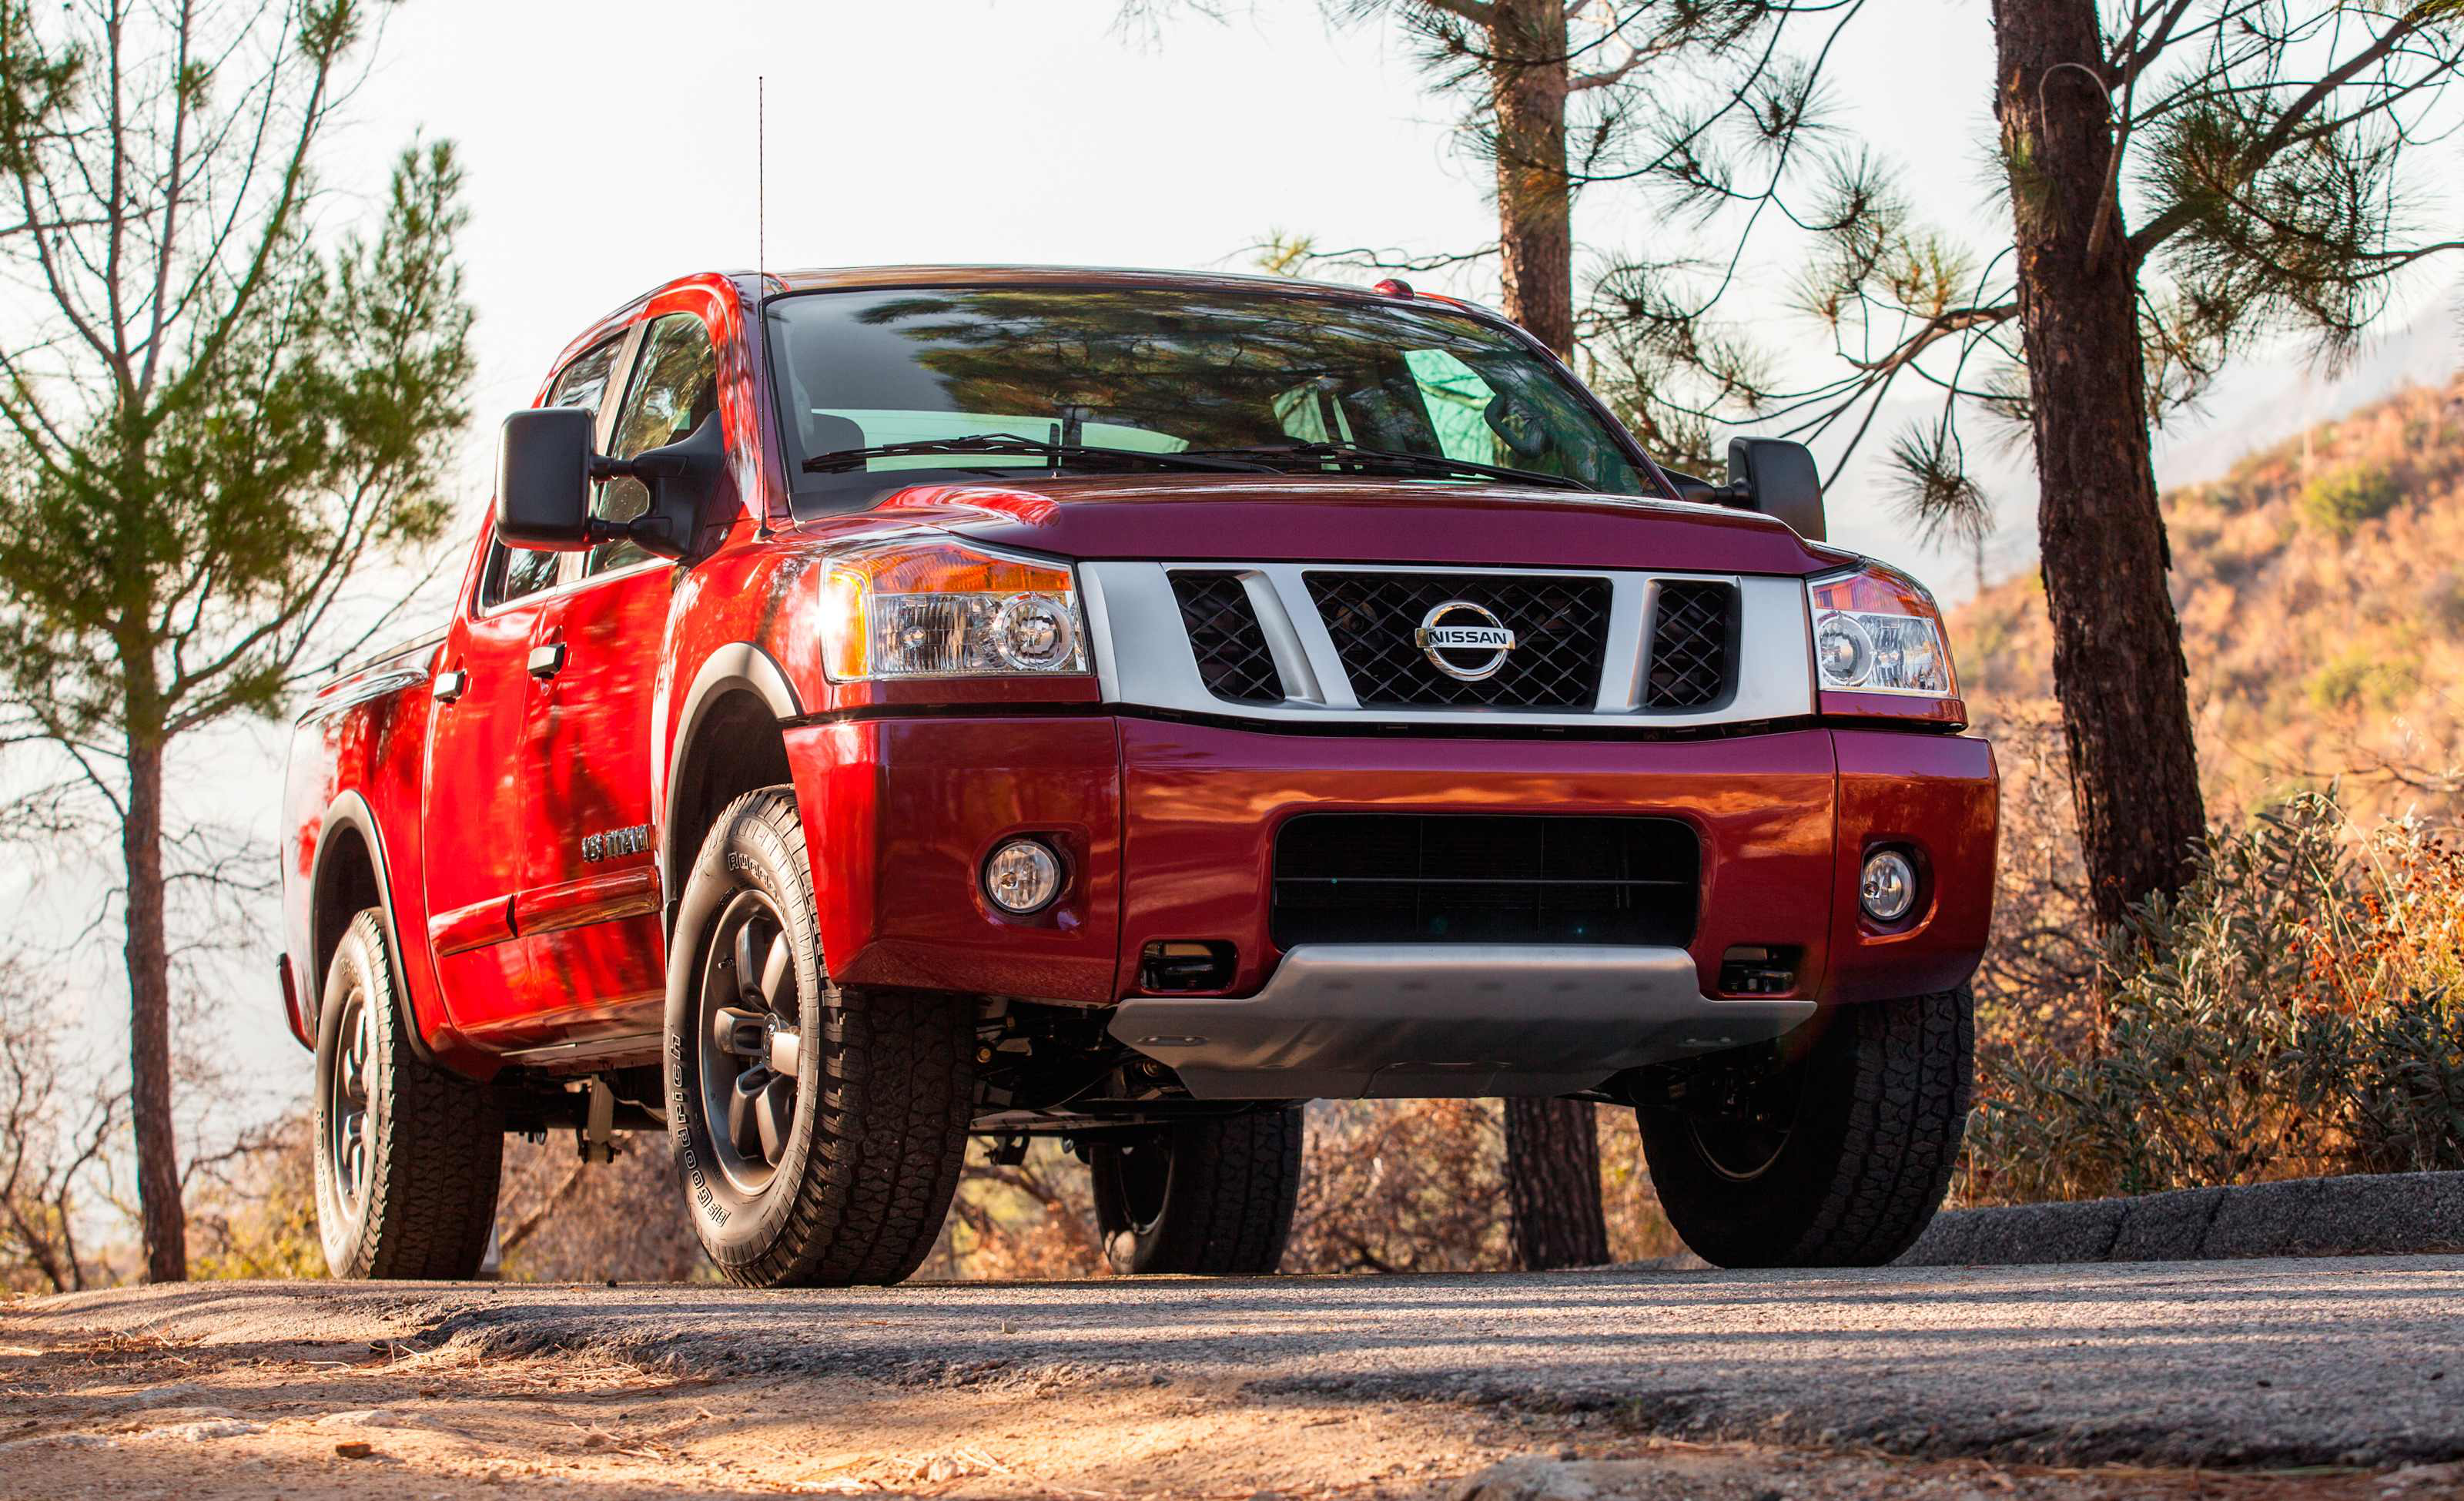 Toyota, Nissan land 2 on 'most fuel efficient trucks' list | Medium 2014 Nissan Frontier 4 Cylinder Towing Capacity